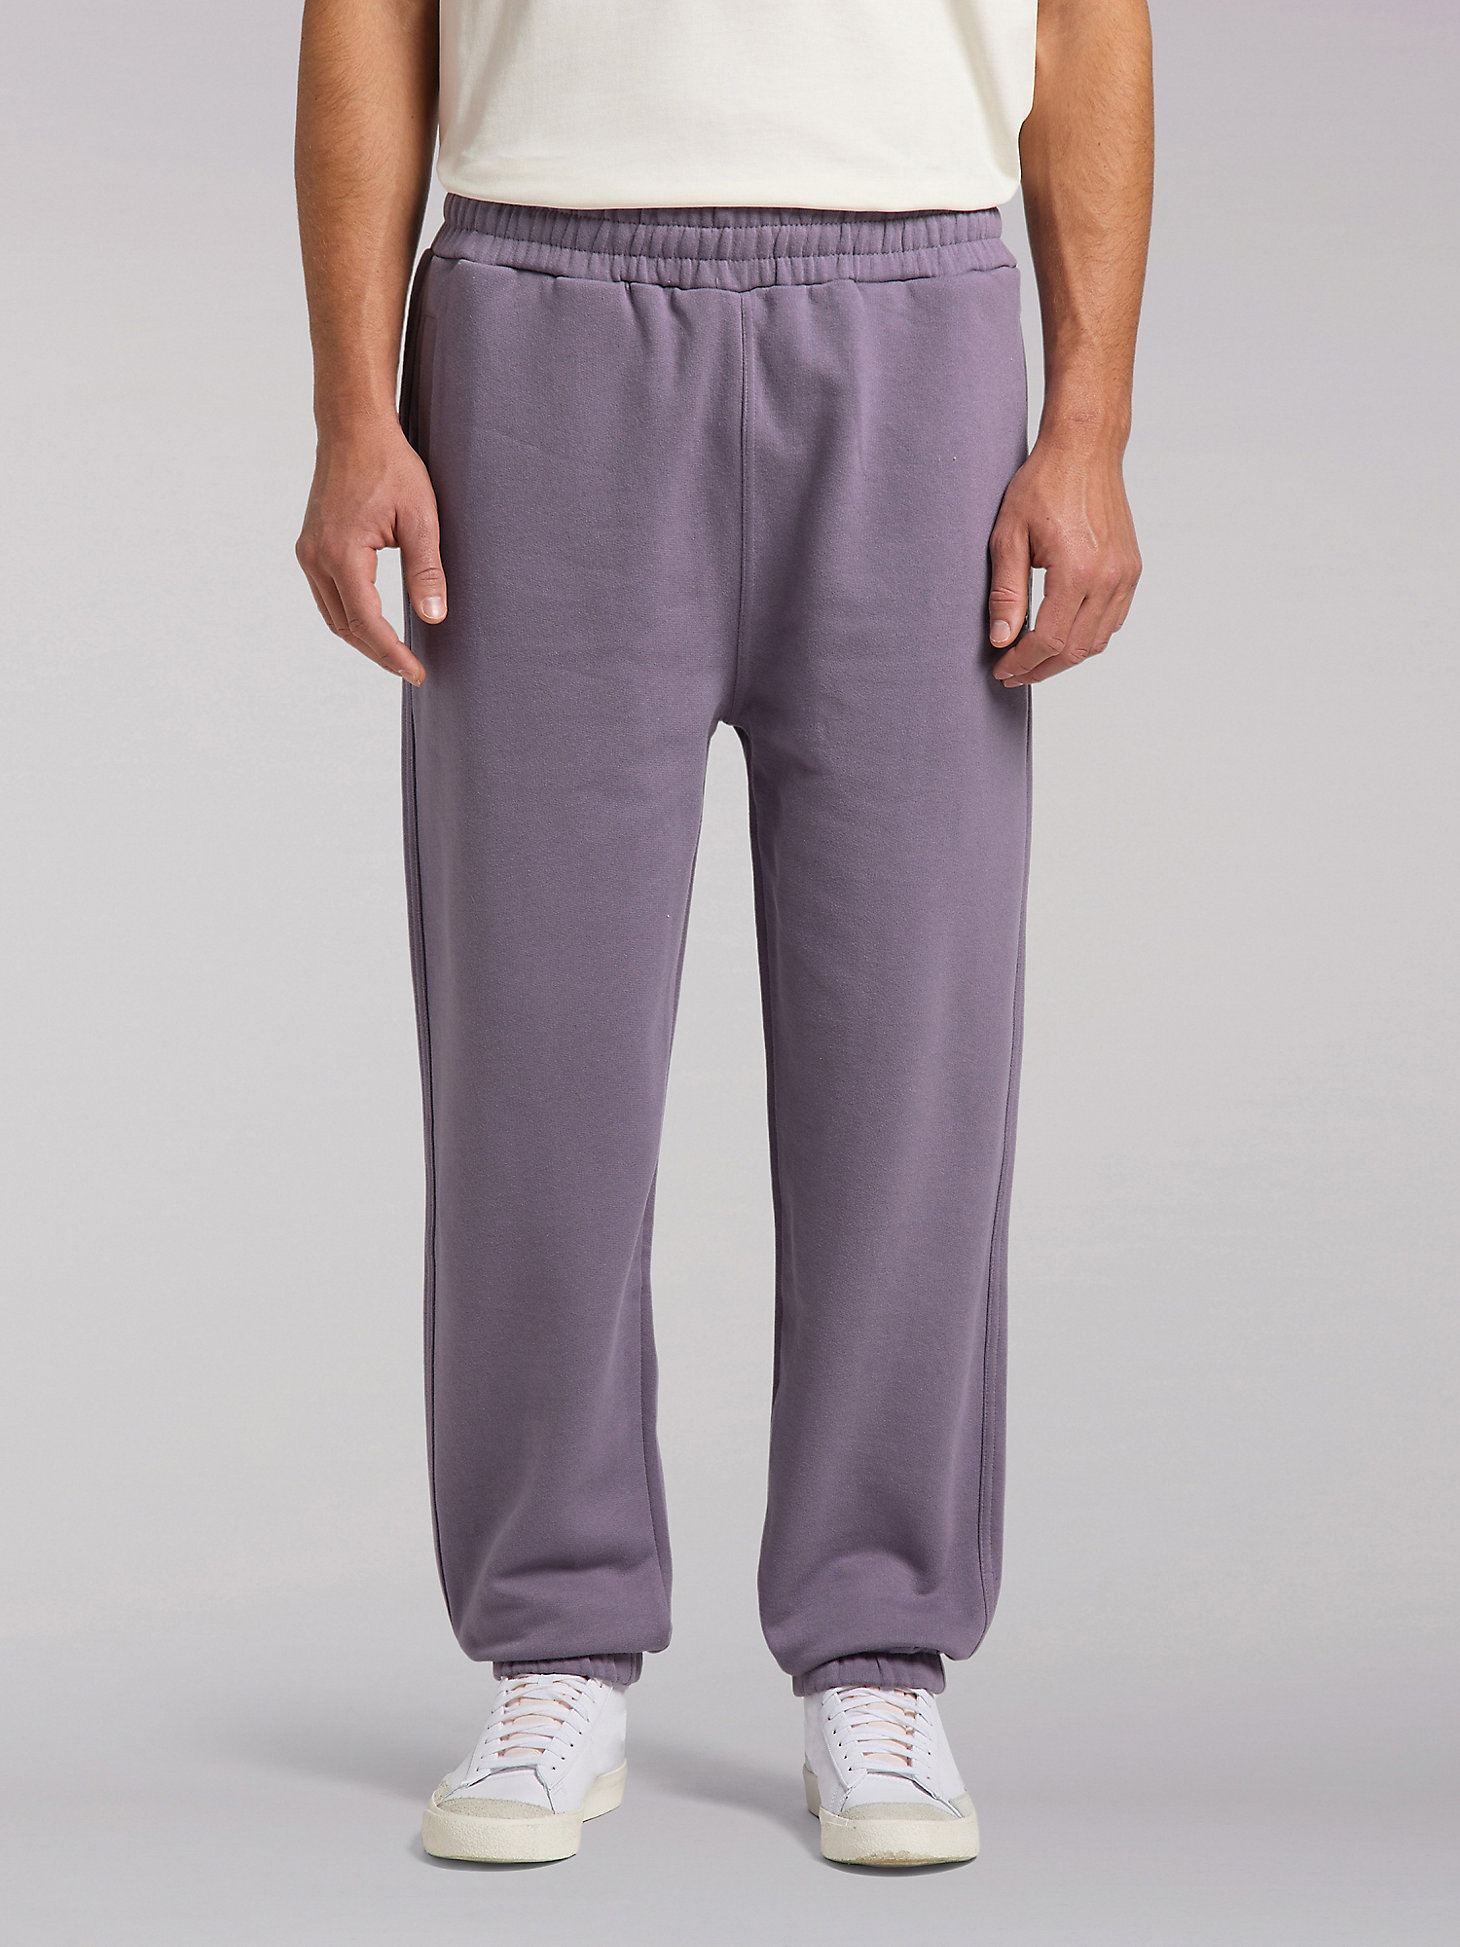 Men's Lee European Collection Pull On Jogger in Washed Purple alternative view 1